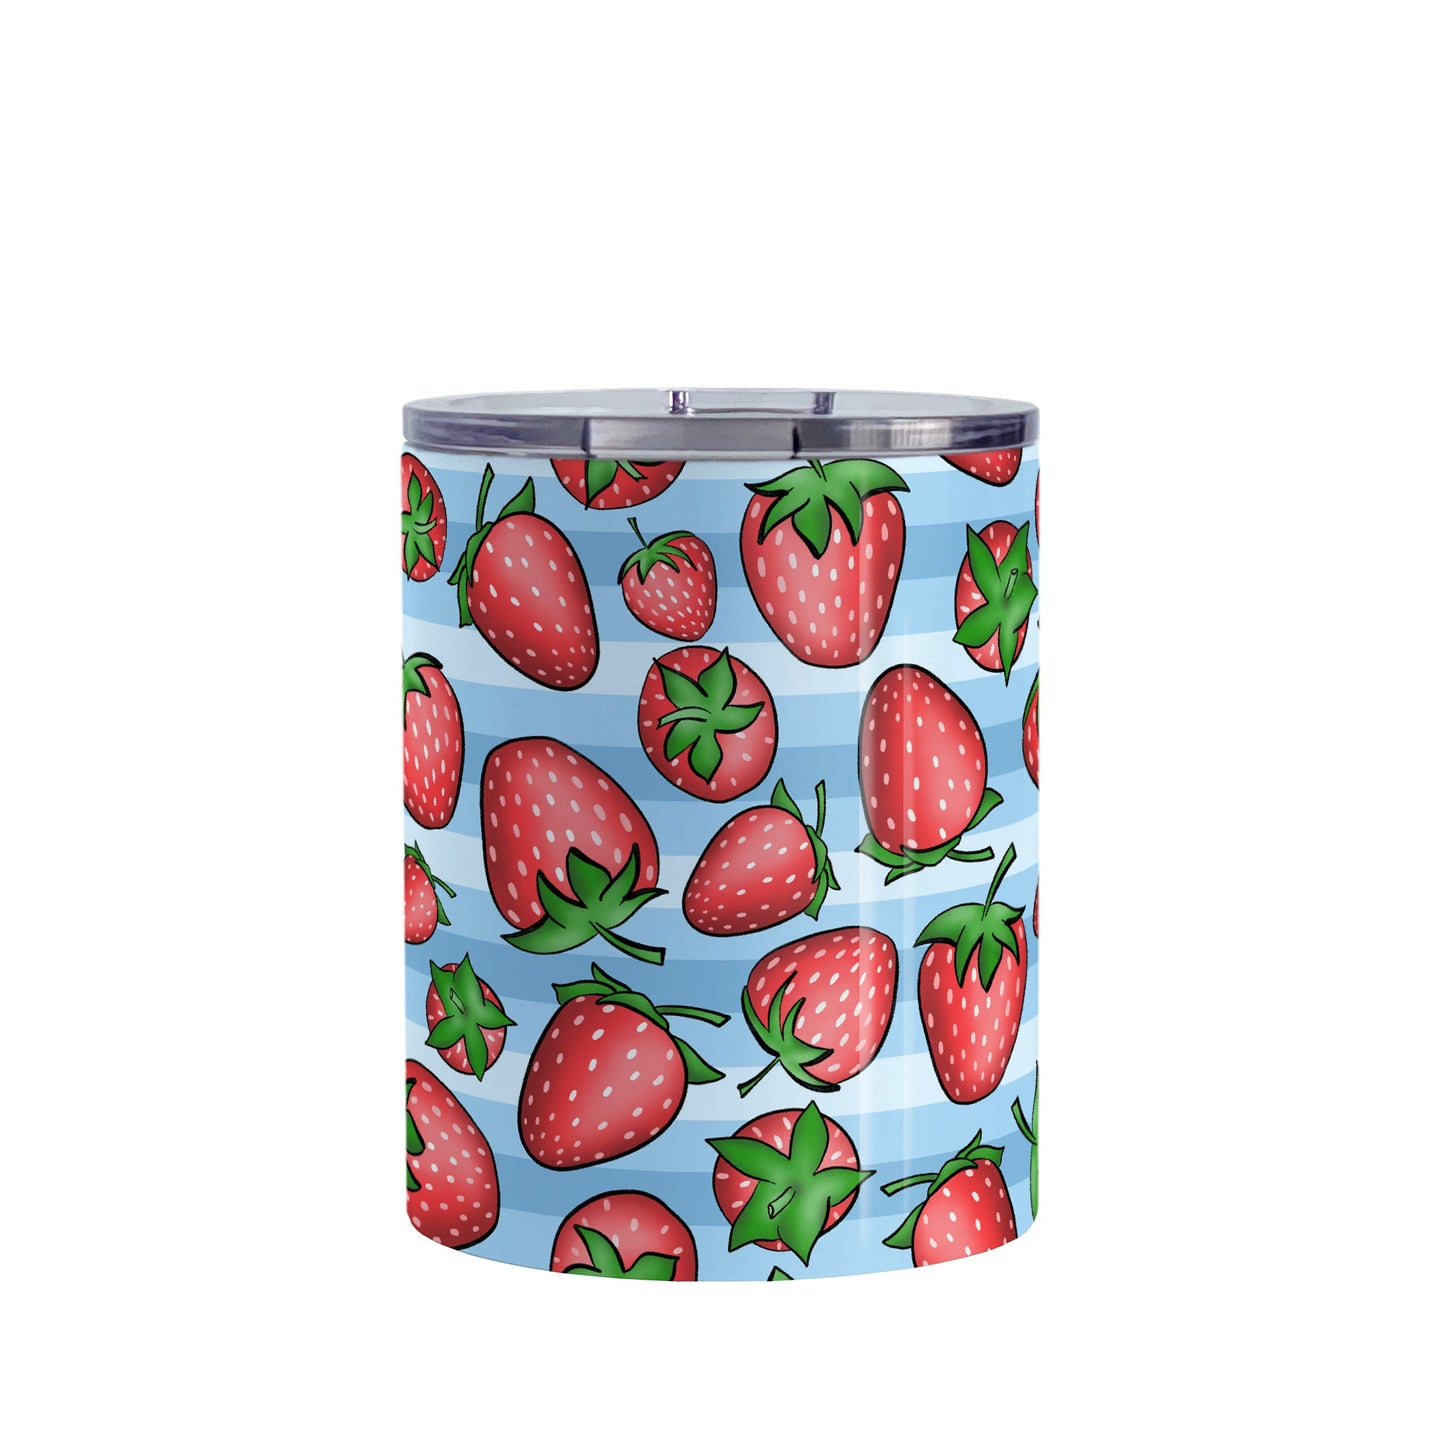 Strawberries on Blue Stripes Tumbler Cup (10oz, stainless steel insulated) at Amy's Coffee Mugs